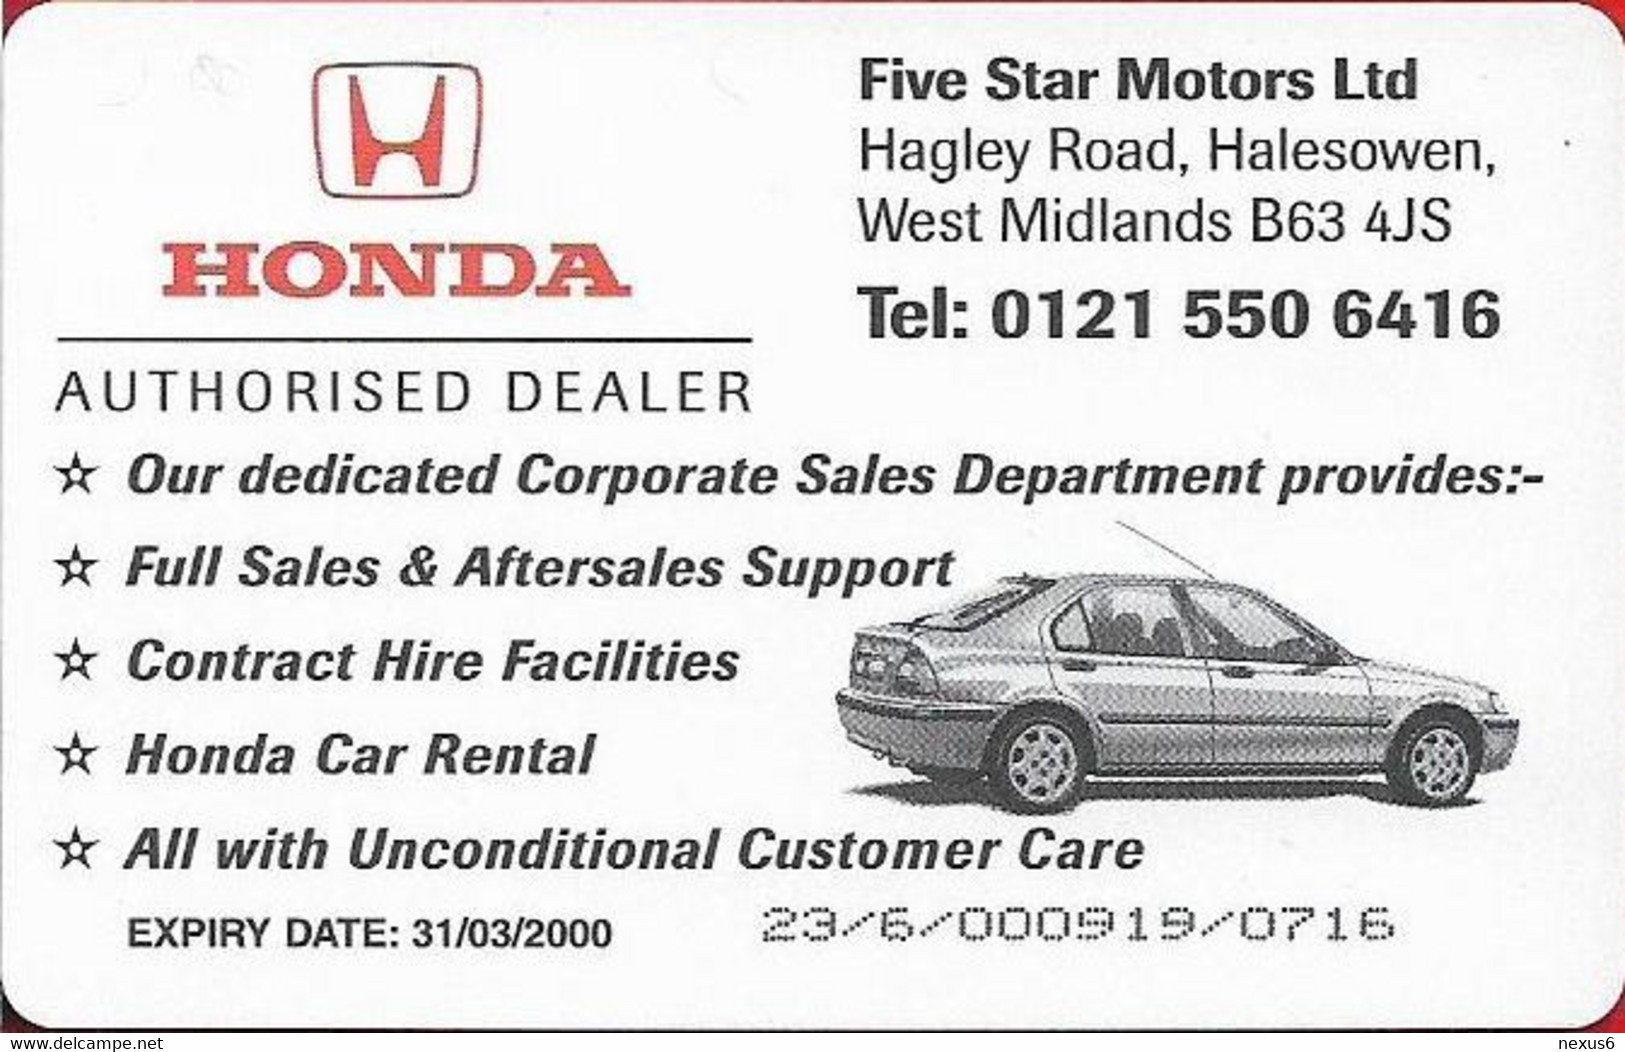 UK - BT (Chip) - PRO375 - BCP-120 - Honda - Five Star Quality Is Just A Phone Call Away, 50P, 2.000ex, Mint - BT Promotionnelles